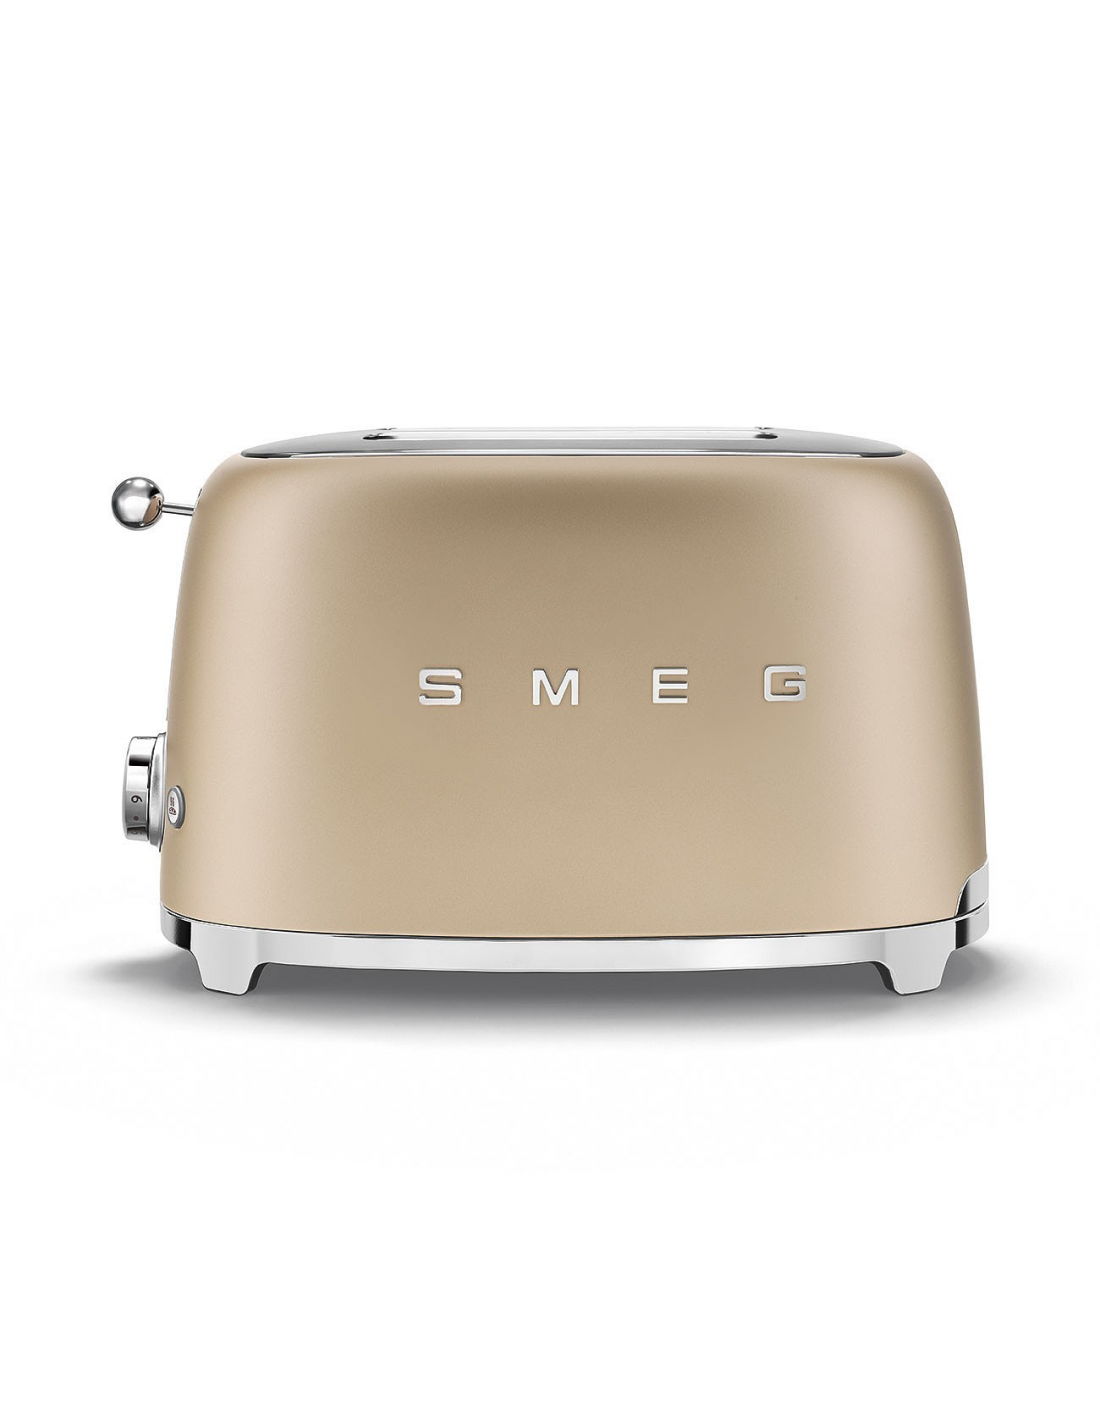 https://manfroyelectro.be/8965-thickbox_default/grille-pain-smeg-champagne-mat-2tr.jpg